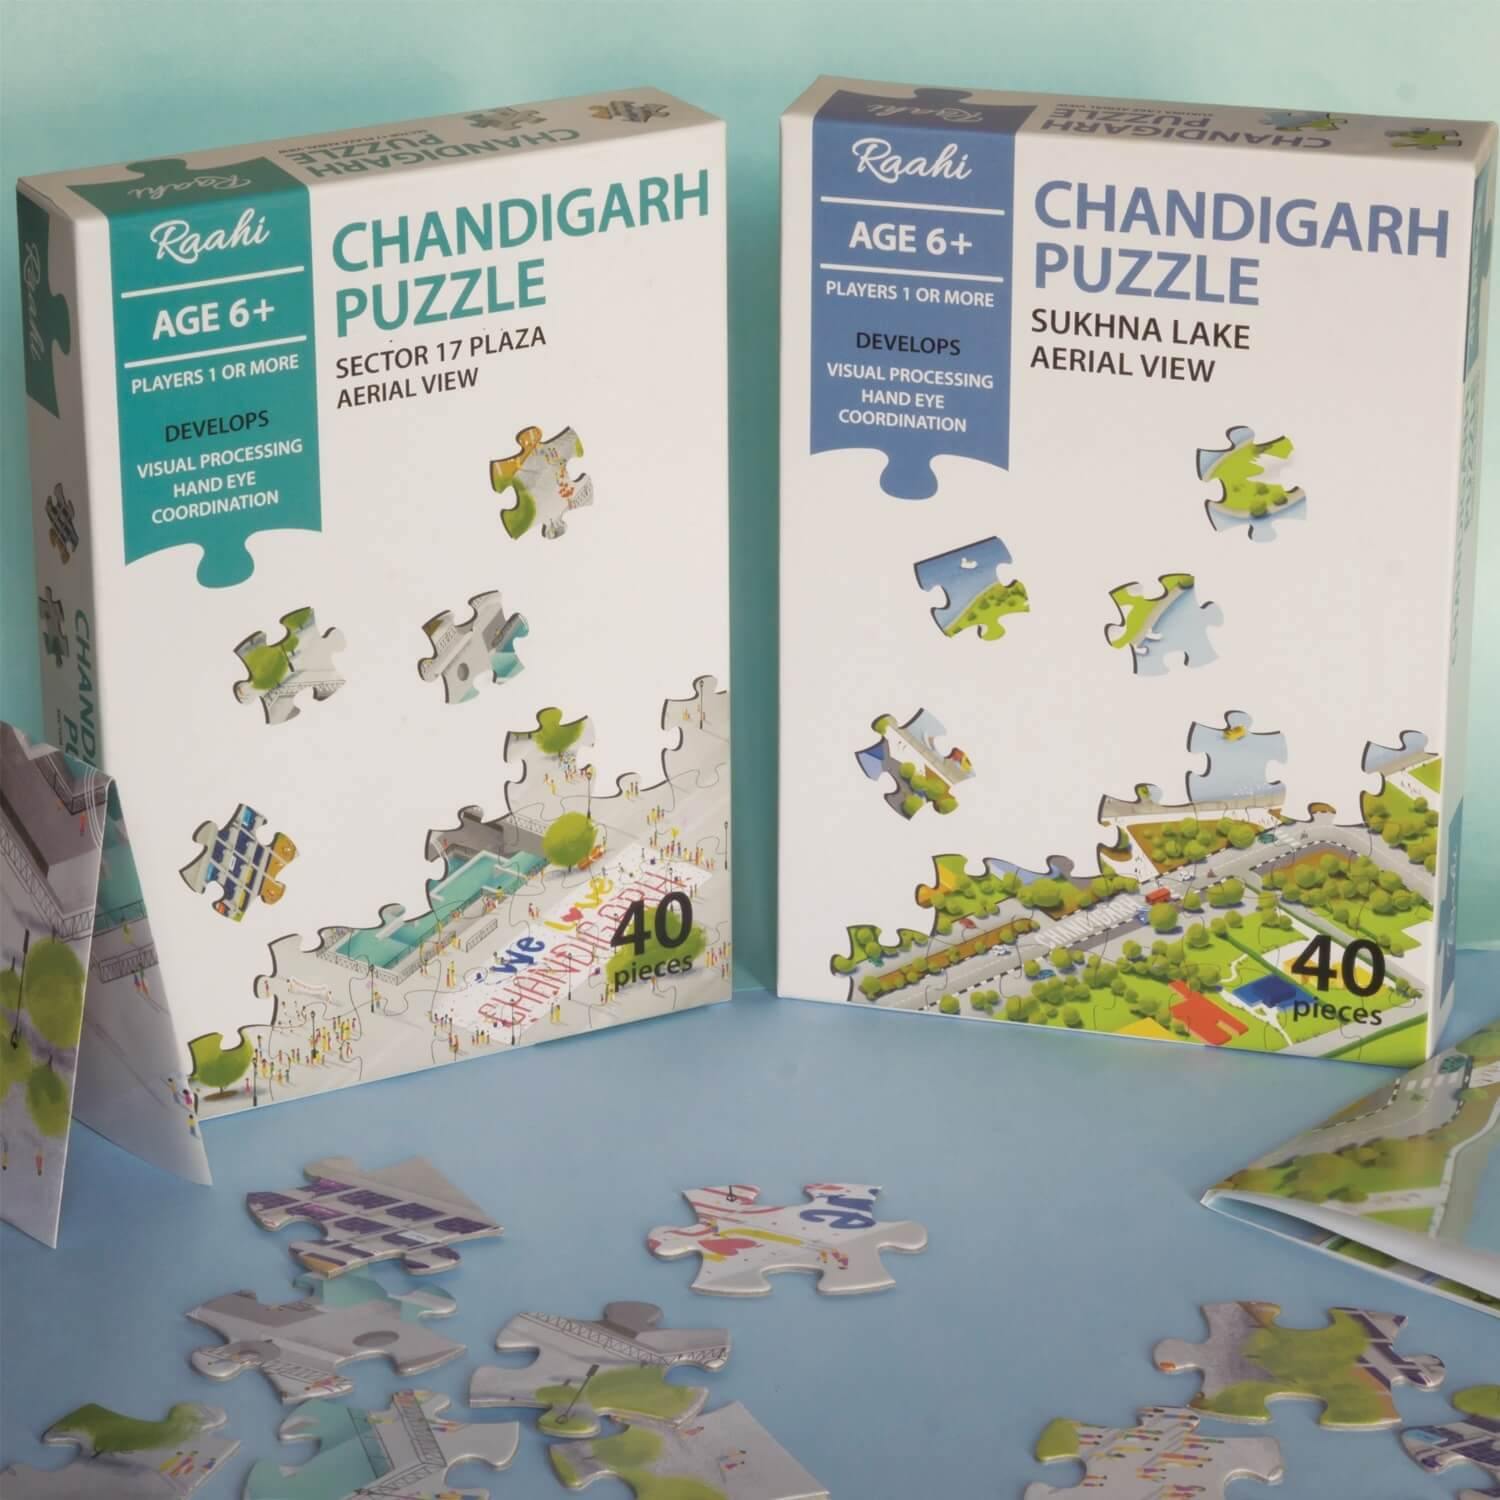 Chandigarh Puzzle Combo - Pack of 2 - Raahi